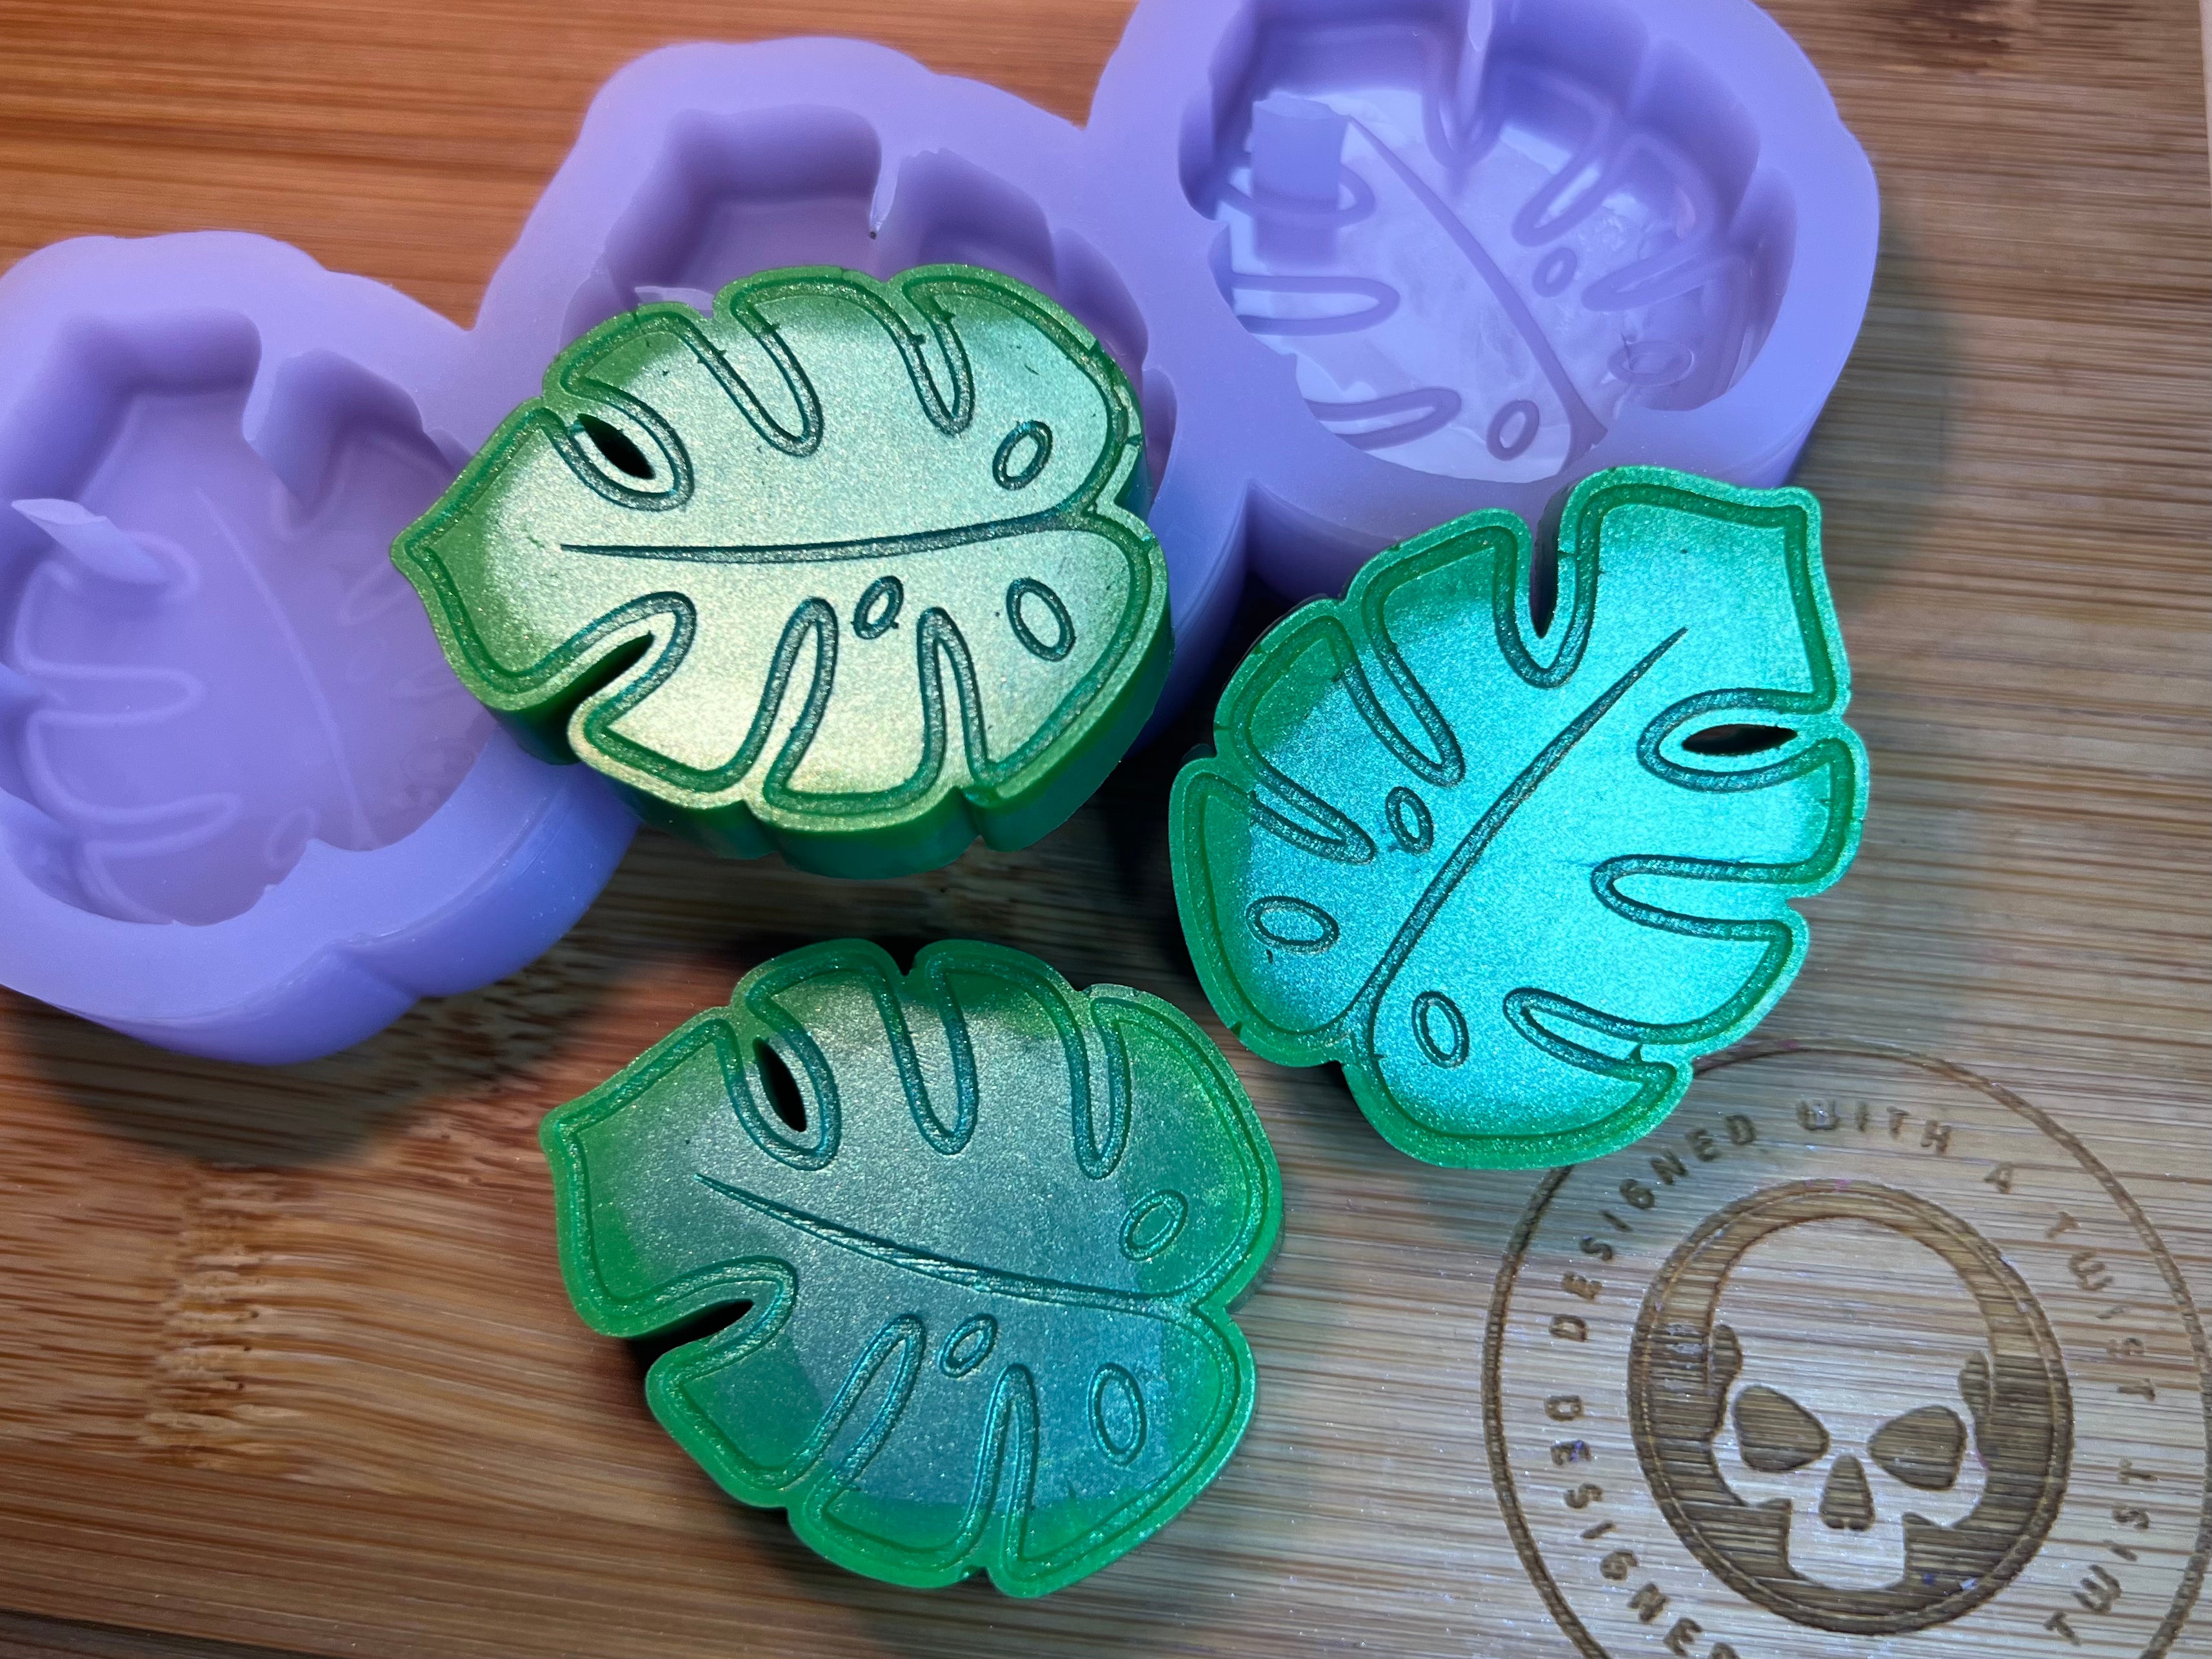 Monstera Leaves Wax Melt Silicone Mold - Designed with a Twist - Top quality silicone molds made in the UK.